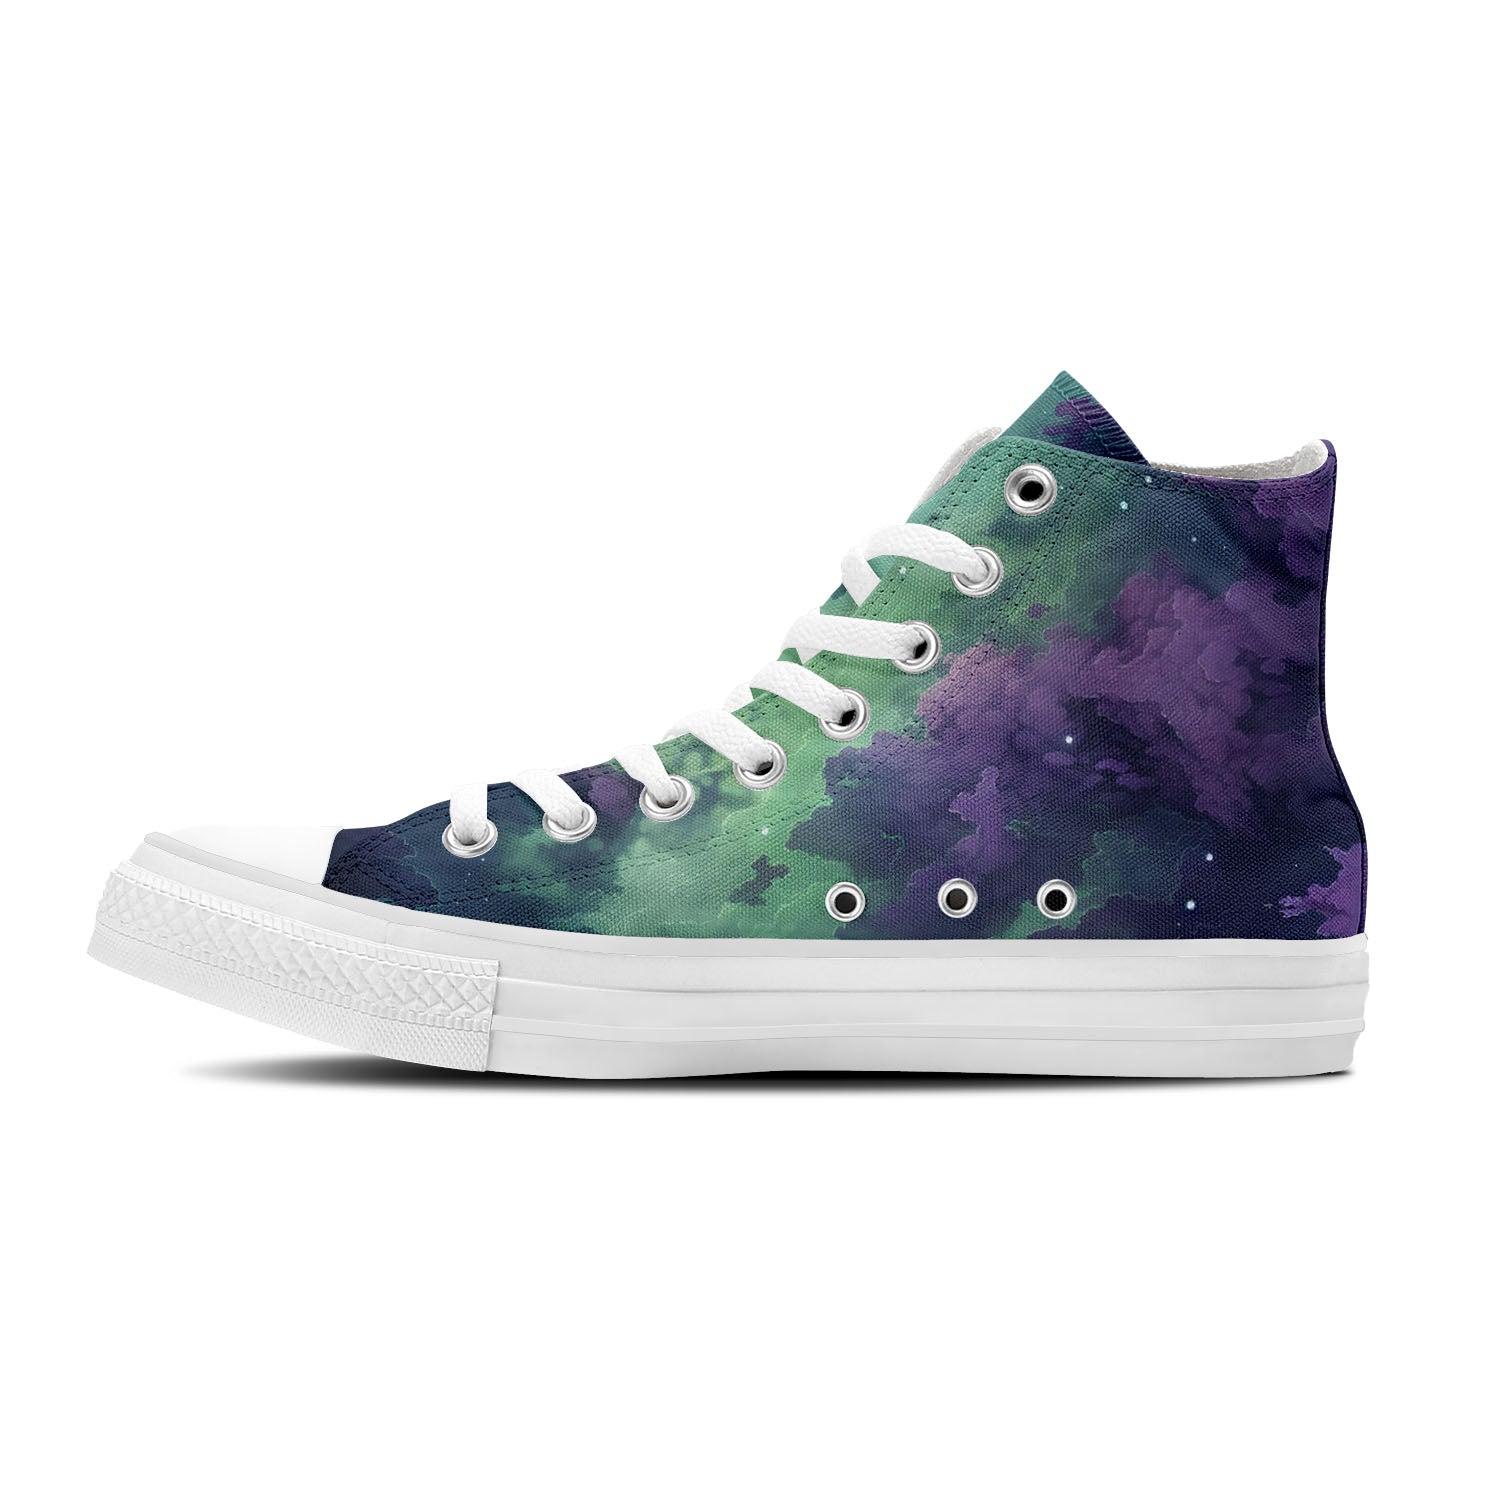 Galactic Allure: Men and Women's Mid-Top Canvas Shoes - Explore the Cosmos with Night Sky Elegance